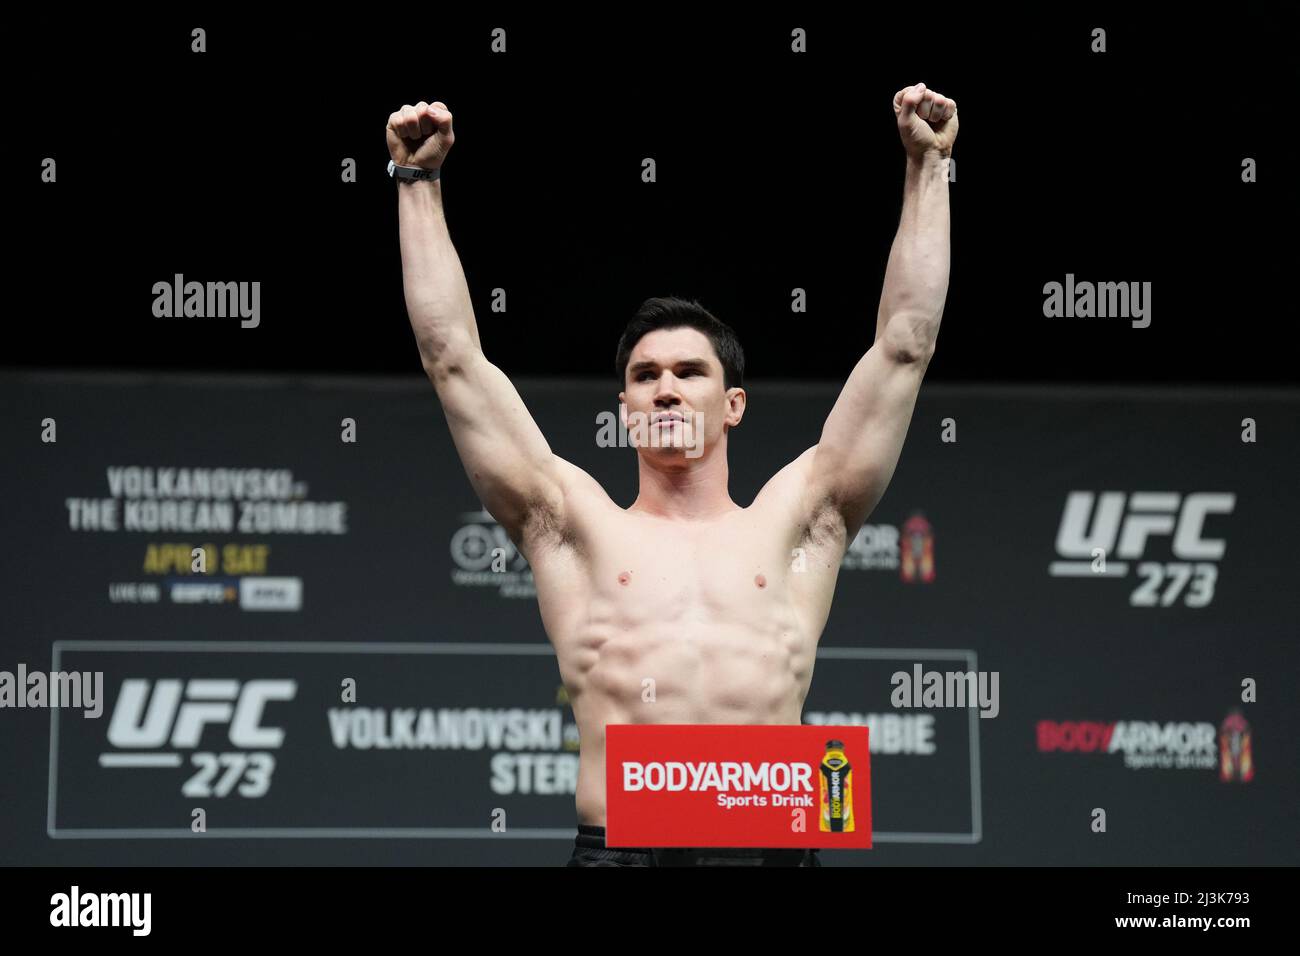 Florida, USA. 08th Apr, 2022. JACKSONVILLE, FL - April 8: Mike Mallot steps on the scale for the fans at Vystar Memorial Arena for UFC 273 - Volkanovski vs The Korean  - Ceremonial Weigh-ins on April 8, 2022 in Jacksonville, Florida, United States. (Photo by Louis Grasse/PxImages) Credit: Px Images/Alamy Live News Stock Photo